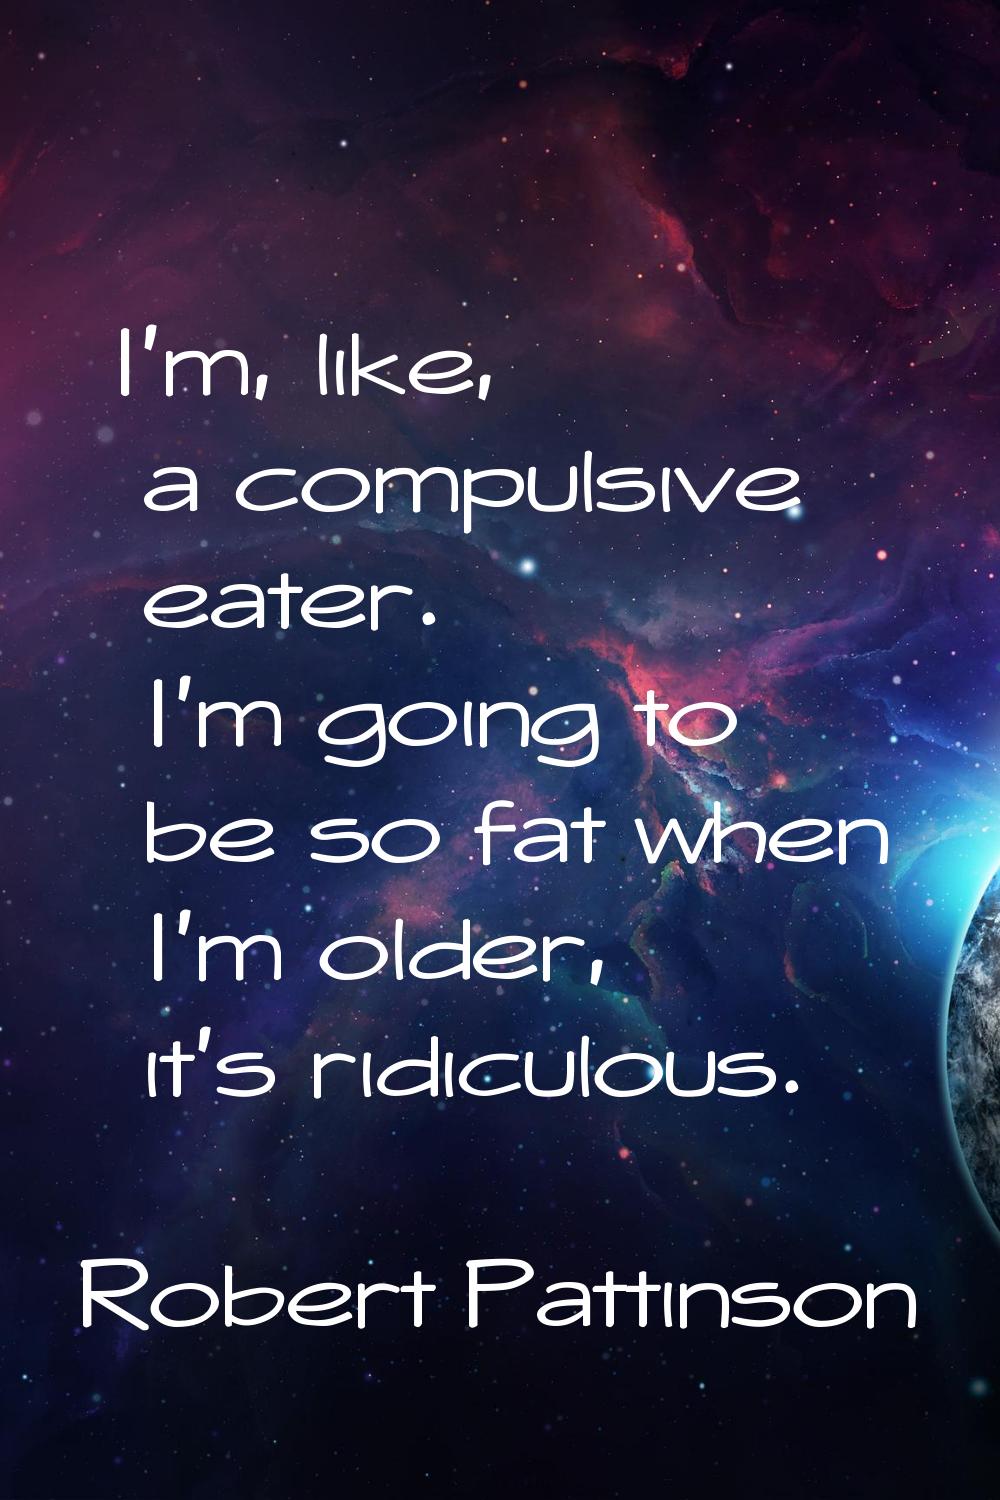 I'm, like, a compulsive eater. I'm going to be so fat when I'm older, it's ridiculous.